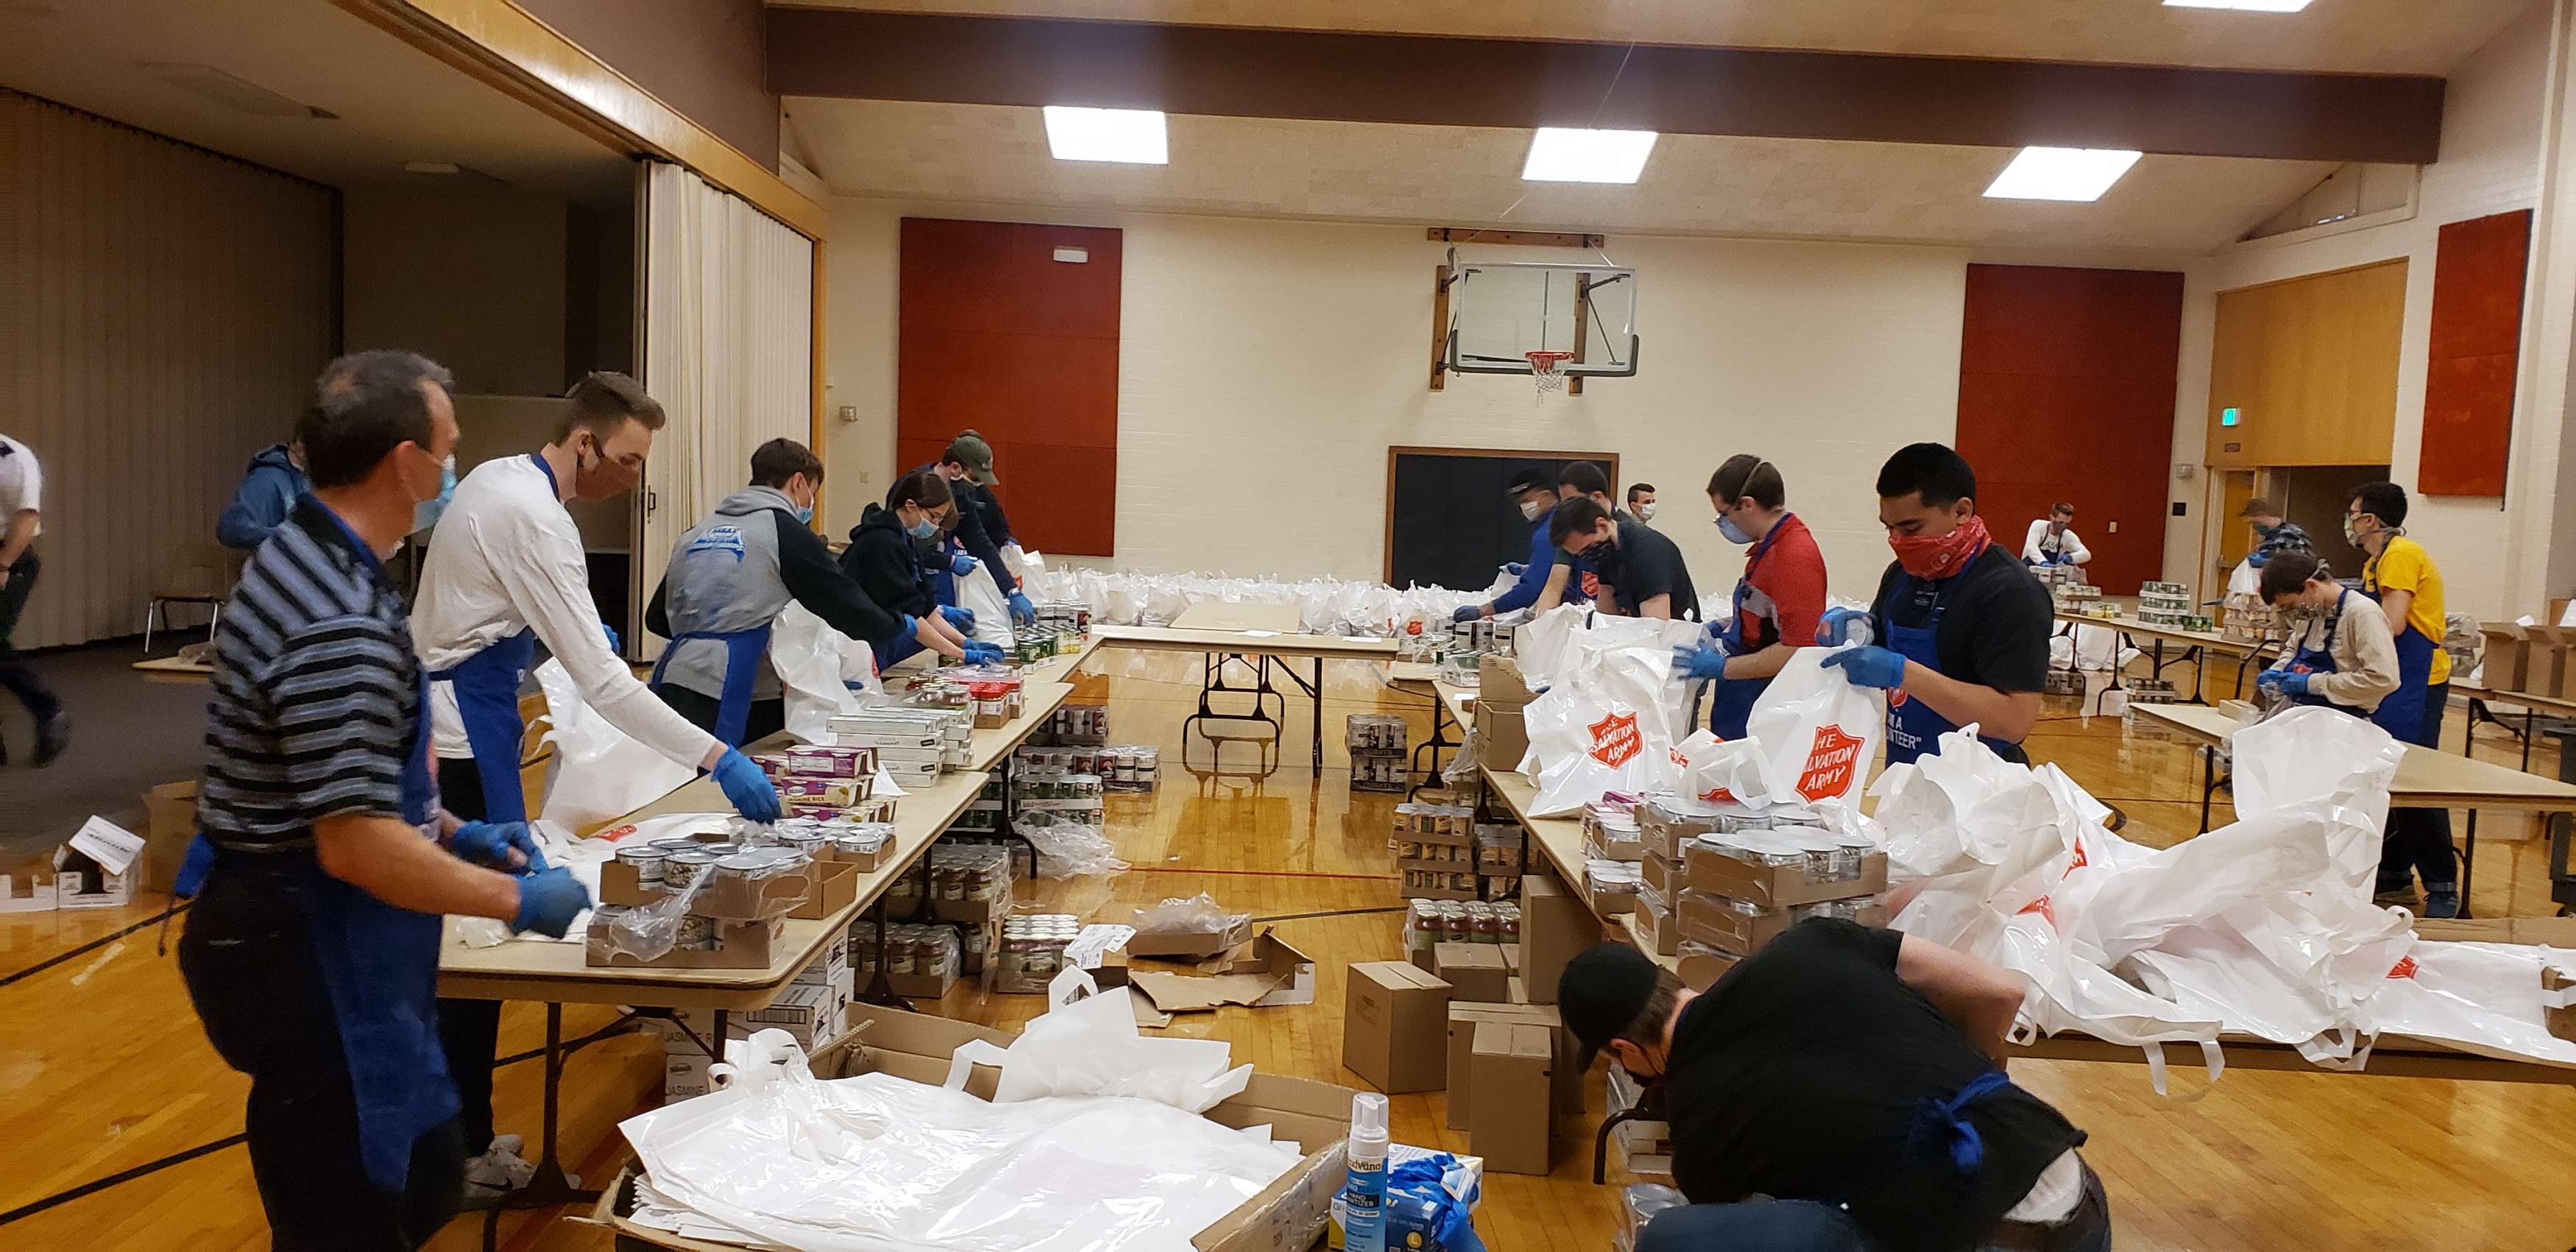 A group of volunteers gather food packages in a gymnasium